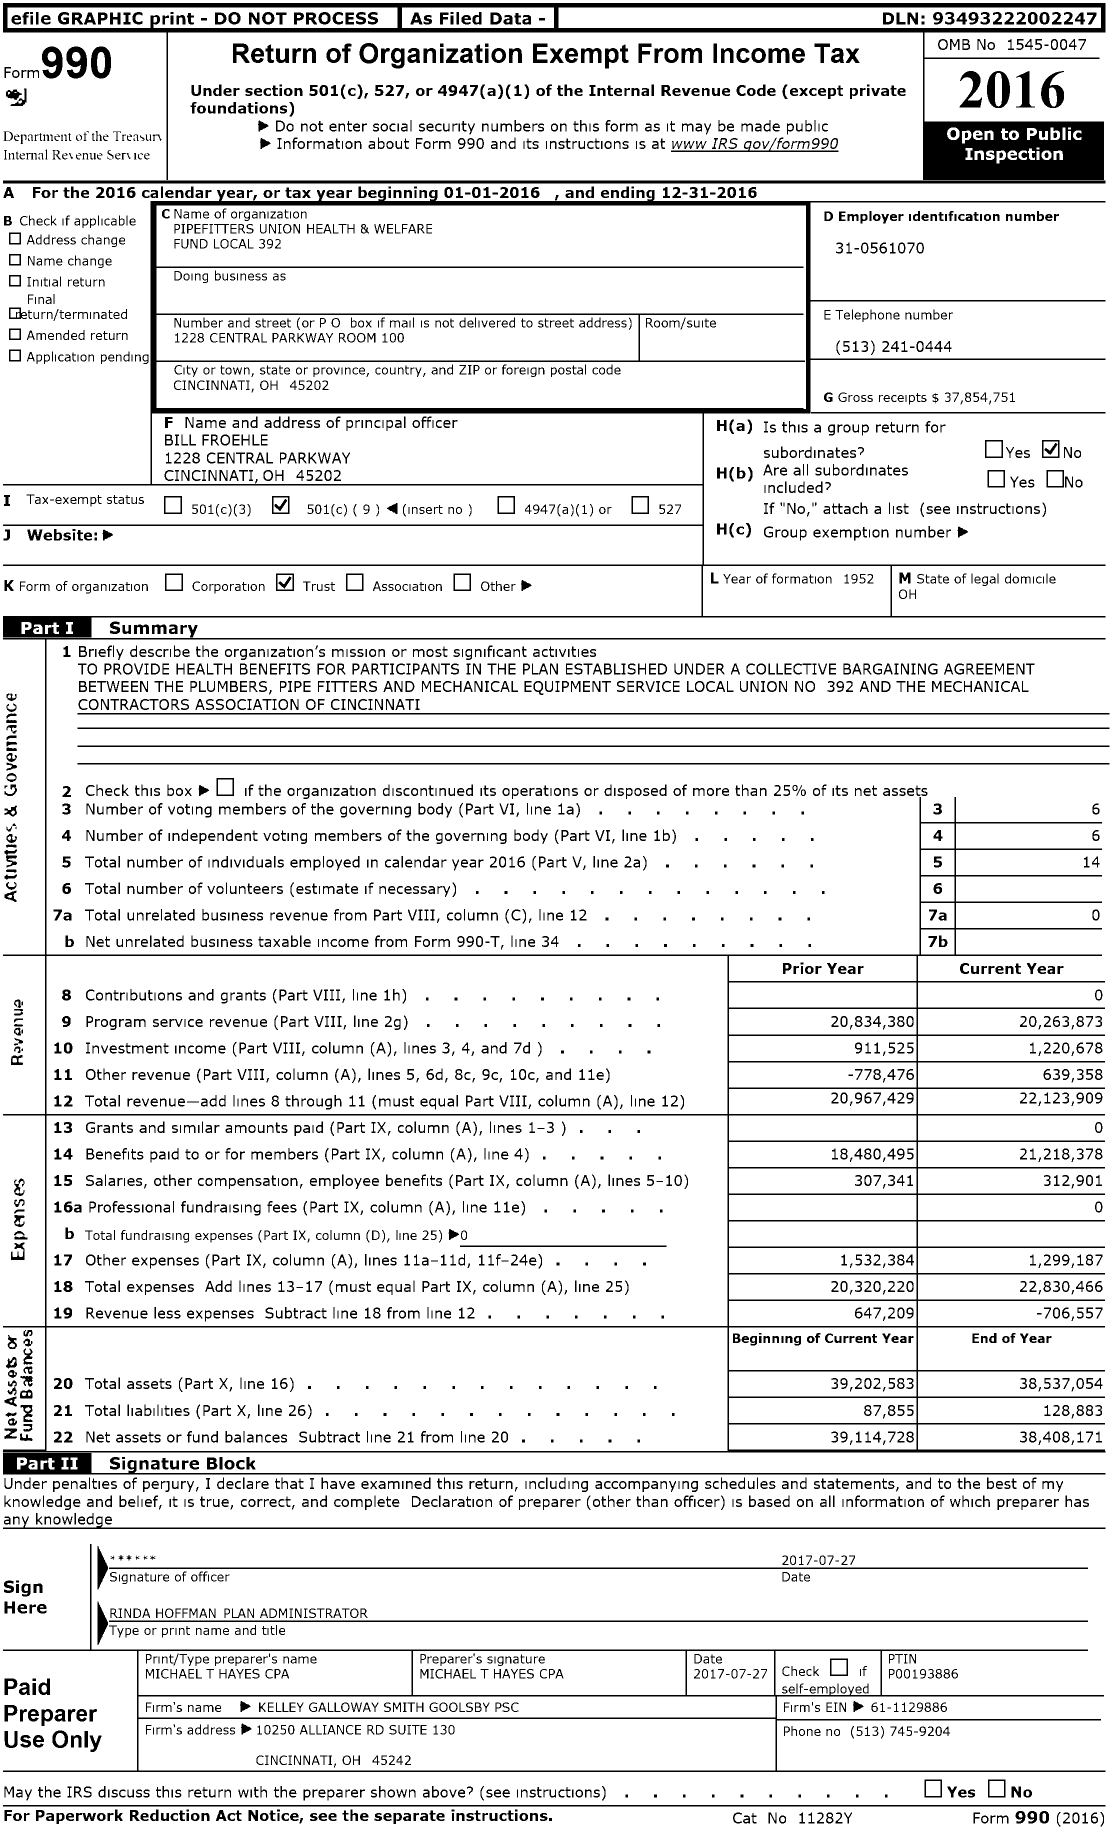 Image of first page of 2016 Form 990O for Pipefitters Union Health and Welfare Fund Local 392